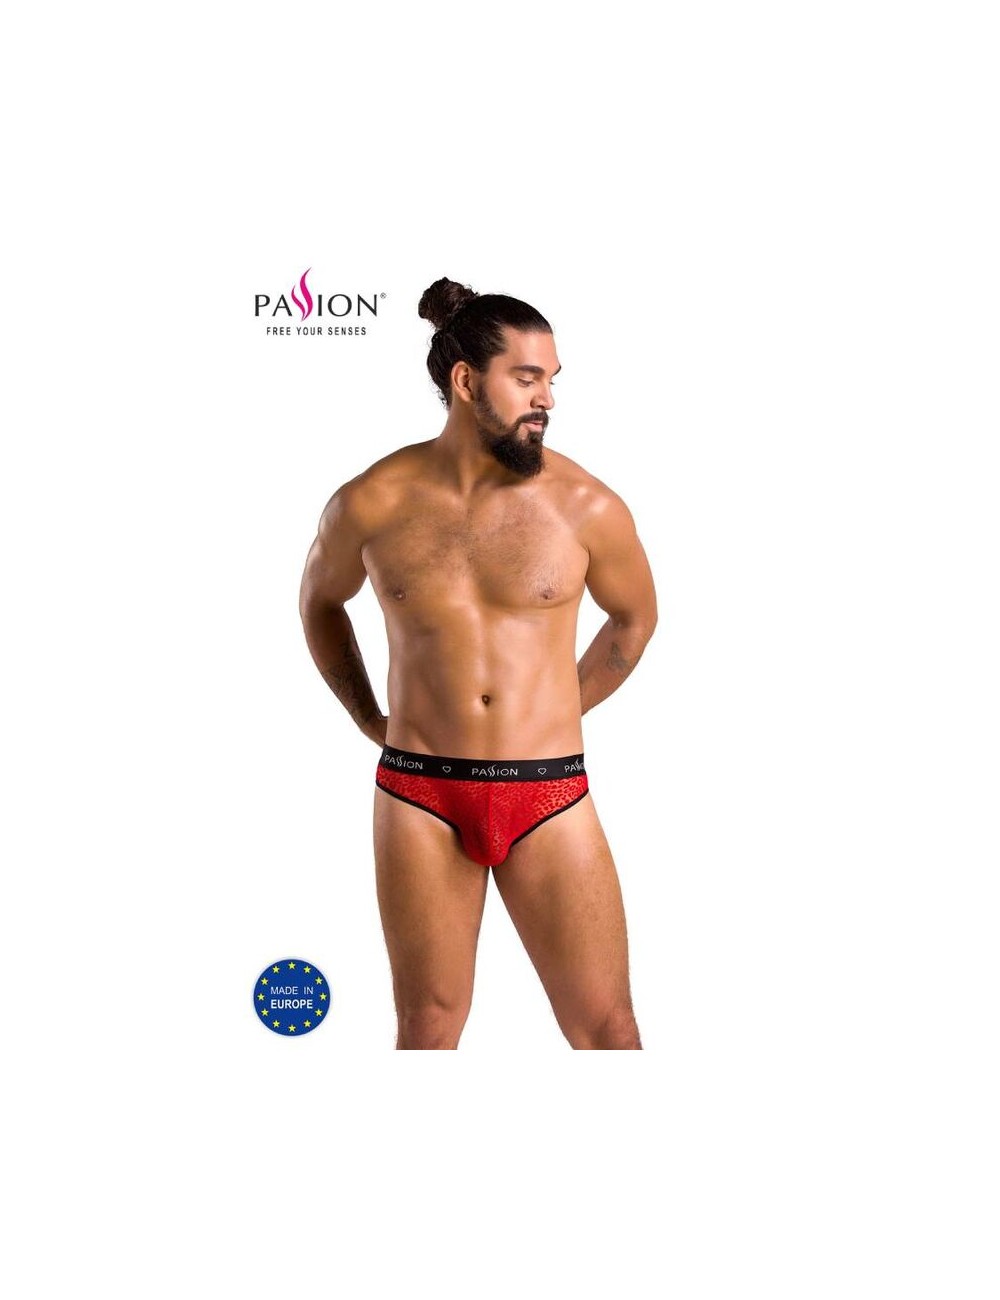 PASSION 031 SLIP MIKE ROUGE S/M